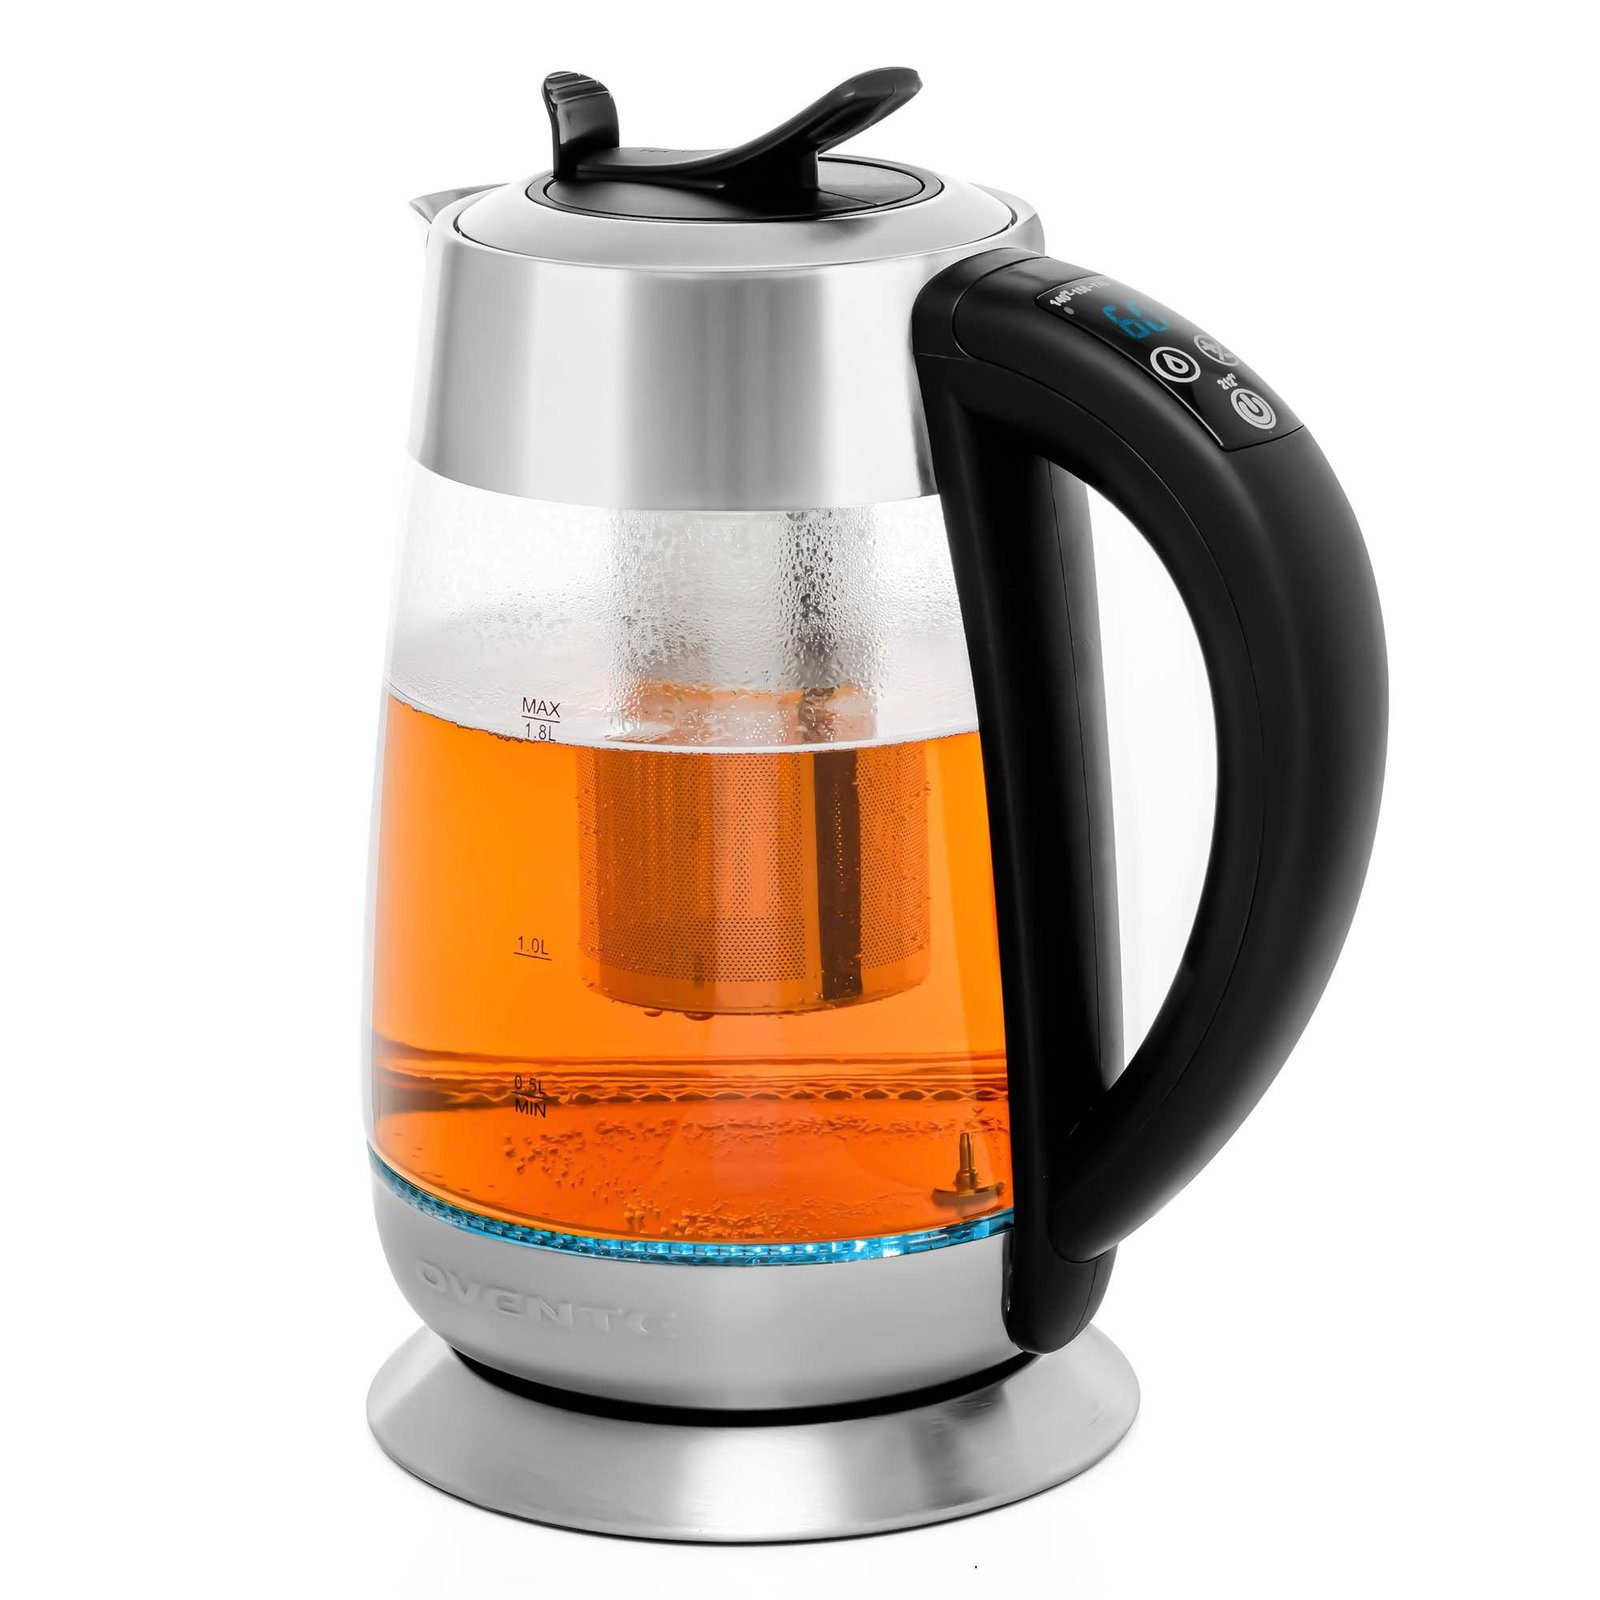 https://themarketdepot.com/wp-content/uploads/2023/01/Ovente-Glass-Electric-Tea-Kettle-1.8-Liter-BPA-Free-Cordless-Body-1500W-Instant-Hot-Water-Boiler-Heater-with-Stainless-Steel-Infuser-and-Automatic-Shut-Off-for-Coffee-3.jpeg